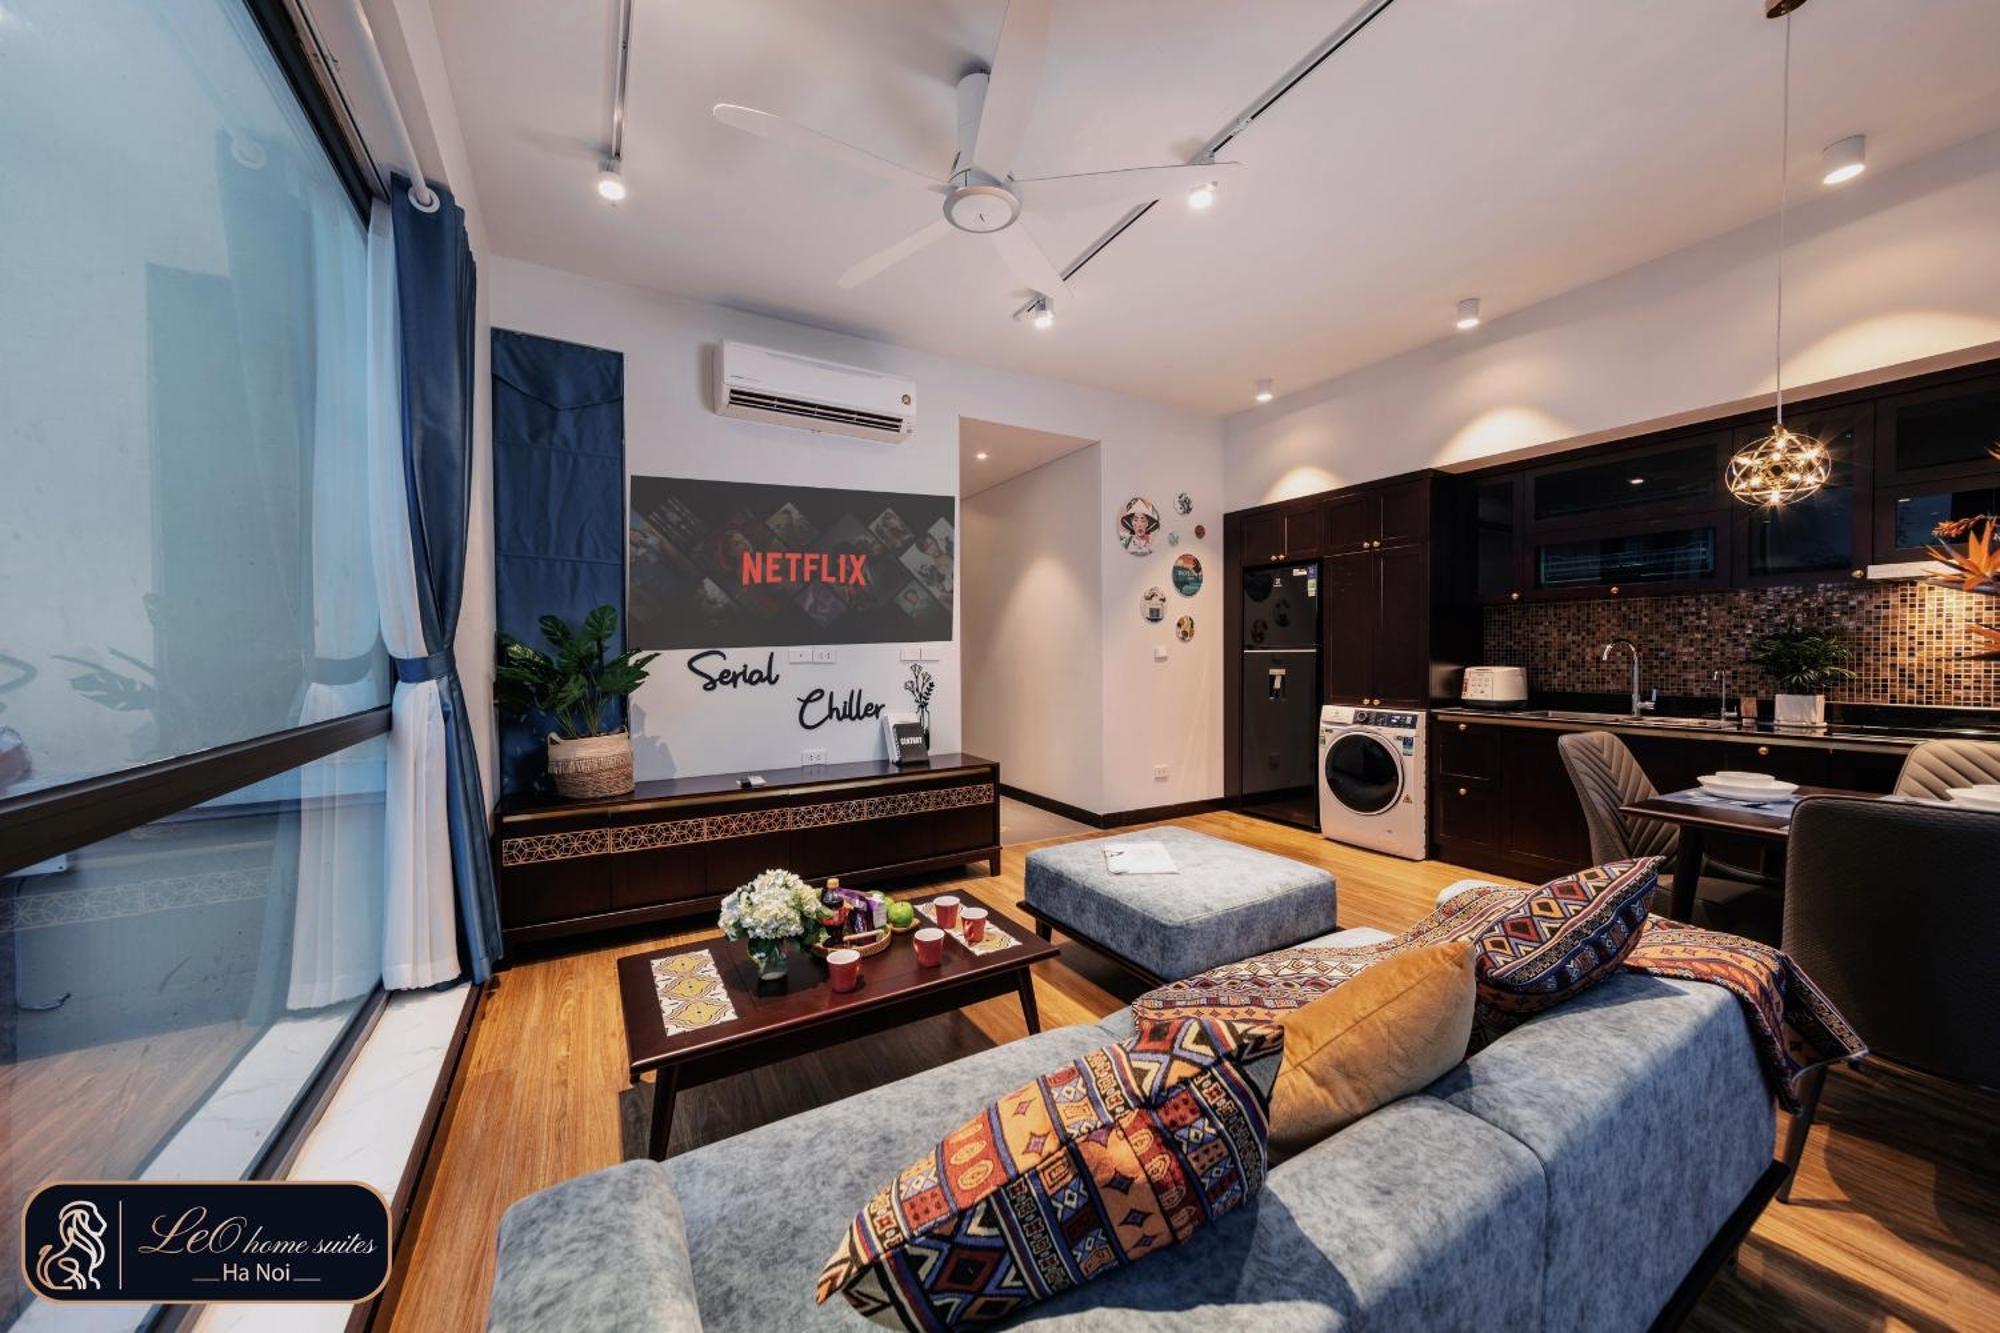 High-Ser Apt W Greenview, Projector And 2Br Incenter - So Warmly And Spacious 河内 外观 照片